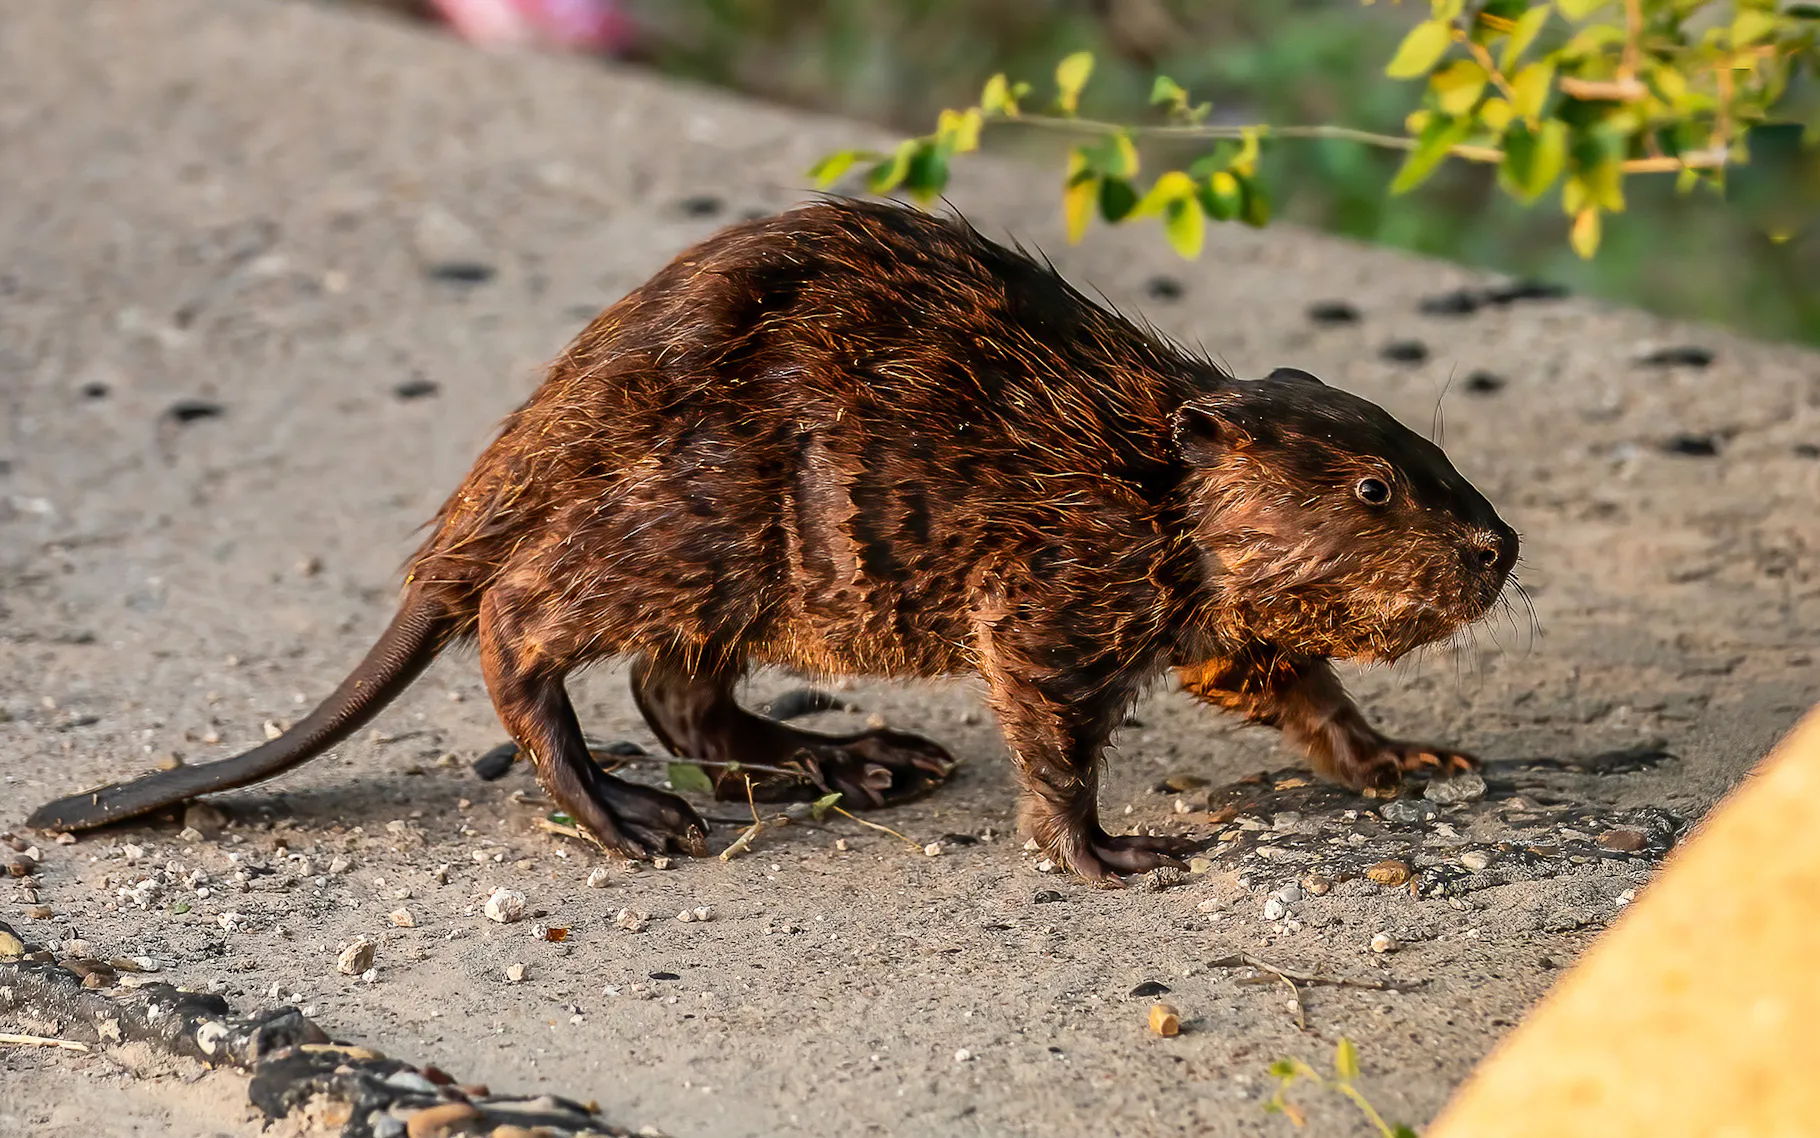 5,000 Years Later, Beavers Return to the High Plains